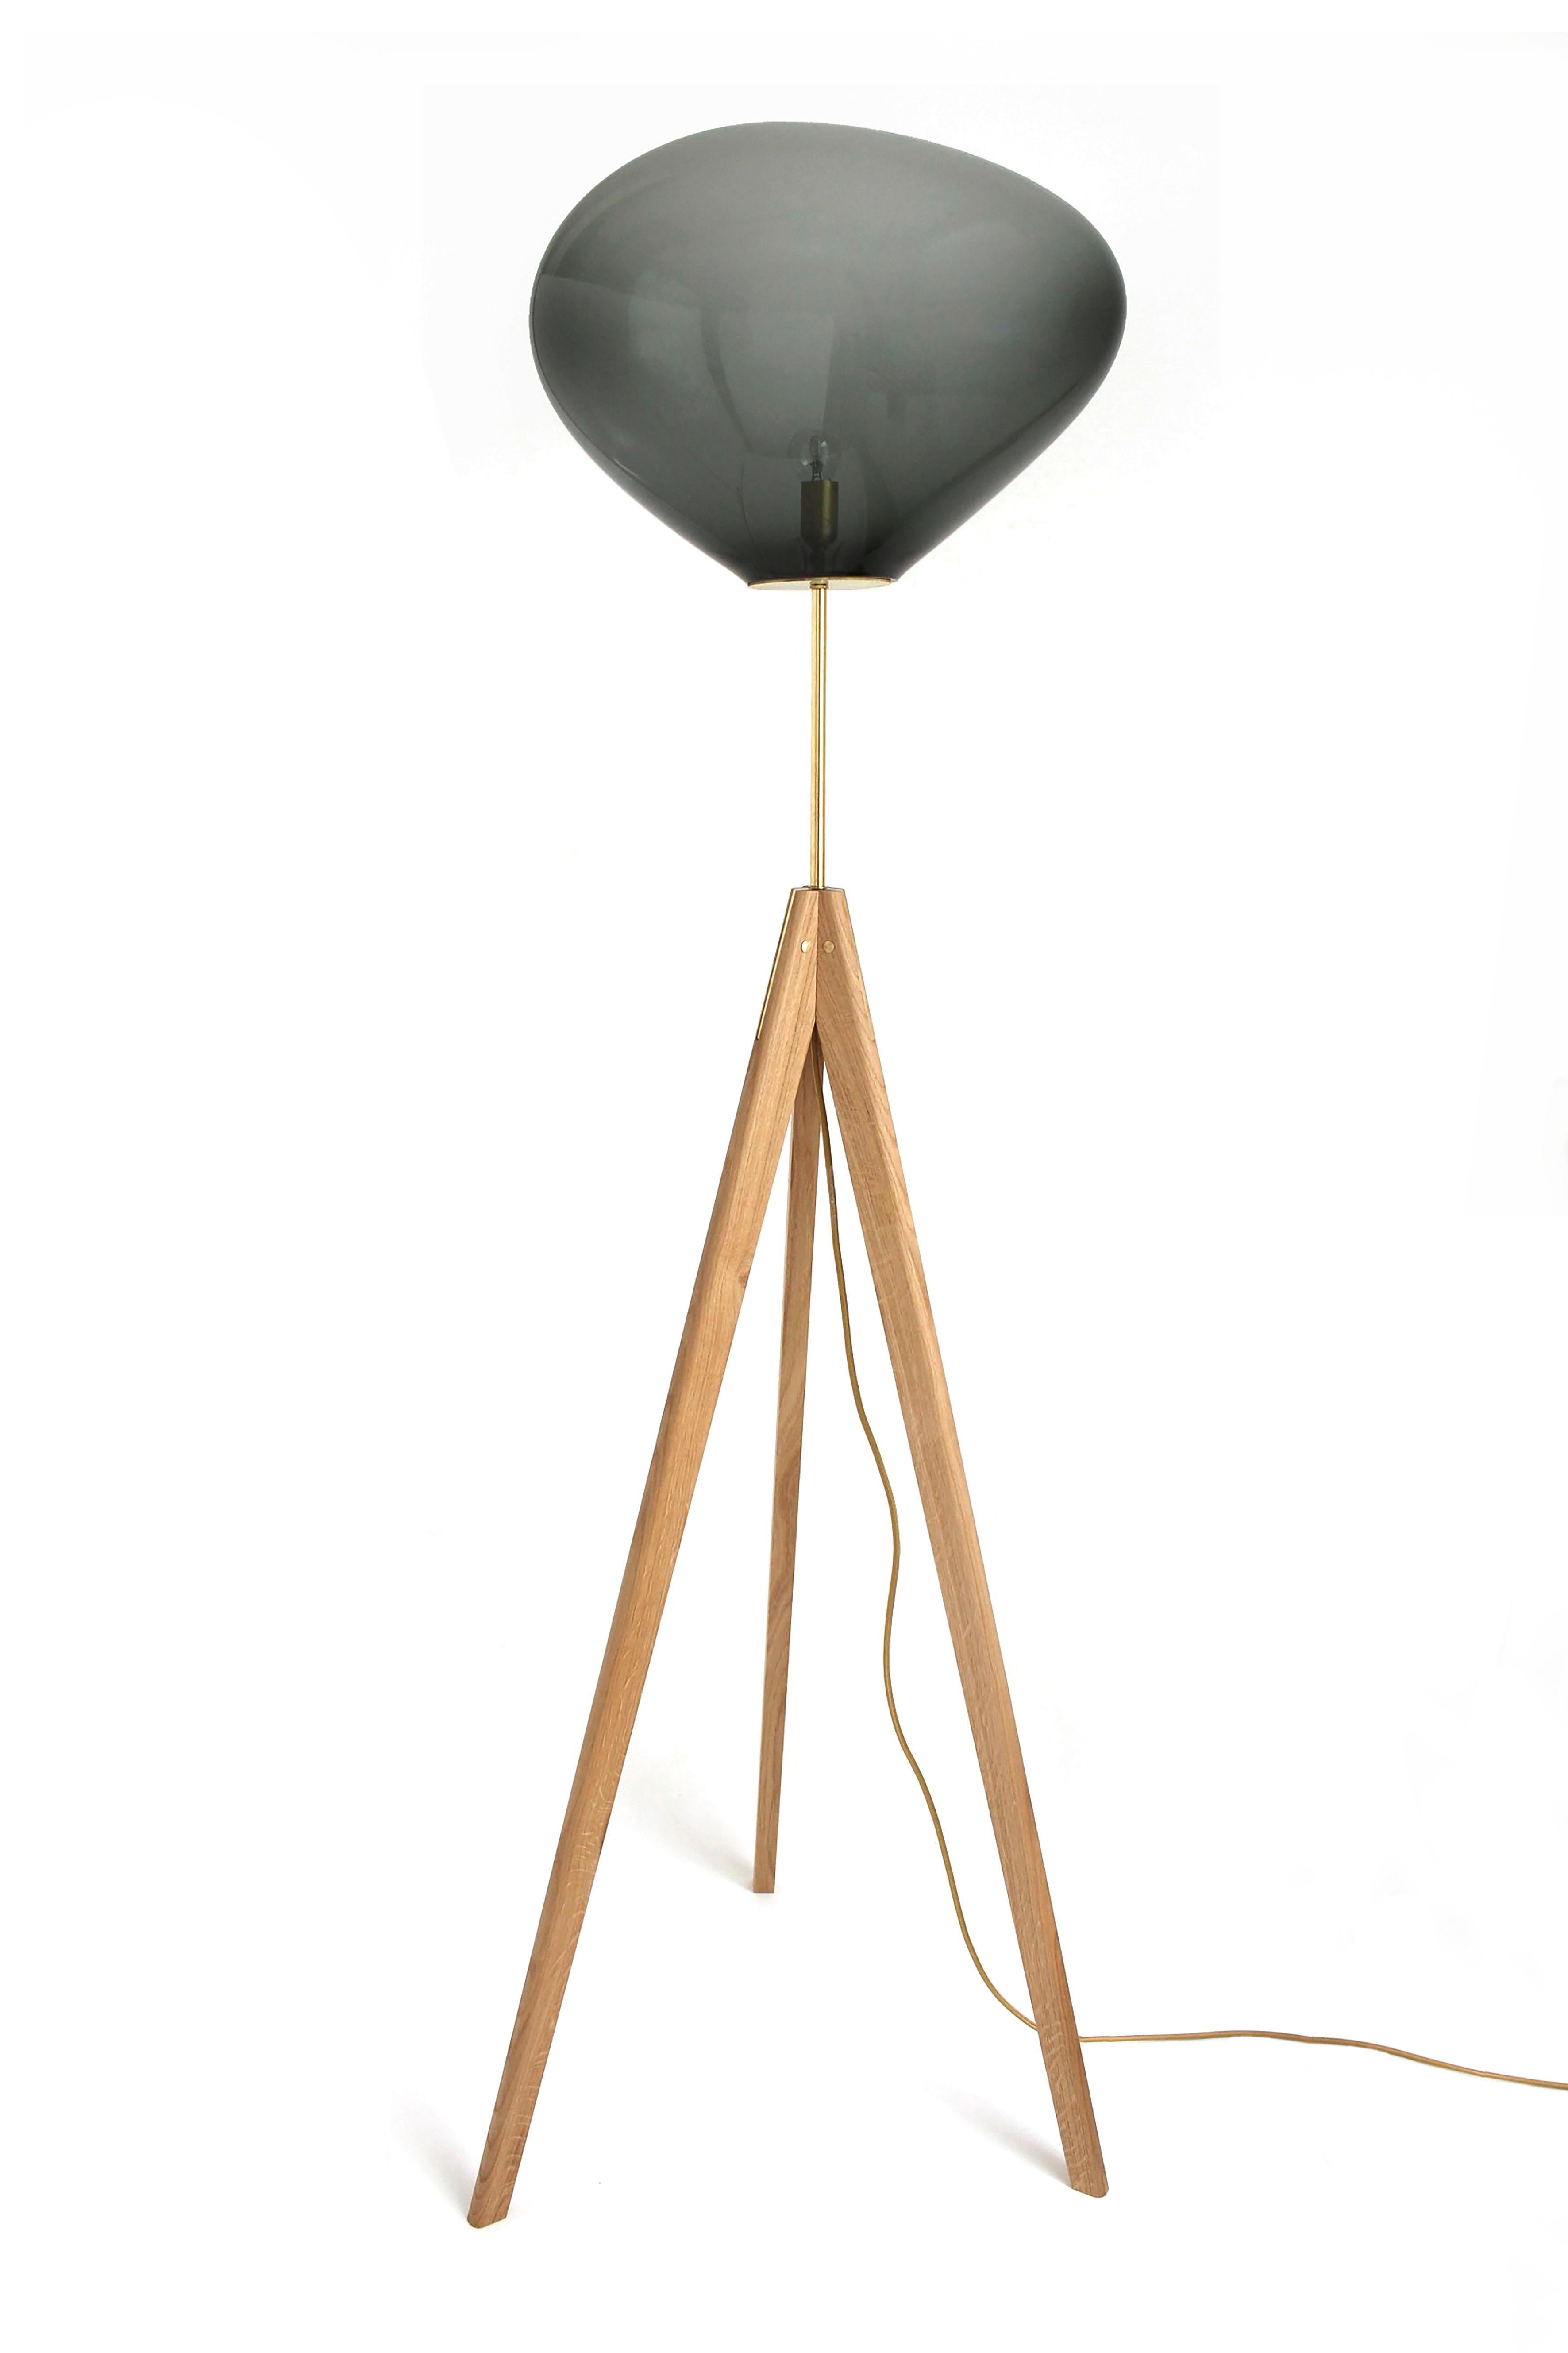 Contemporary Set of 2 Stati x Amber Iridescent Floor Lamps by Eloa For Sale